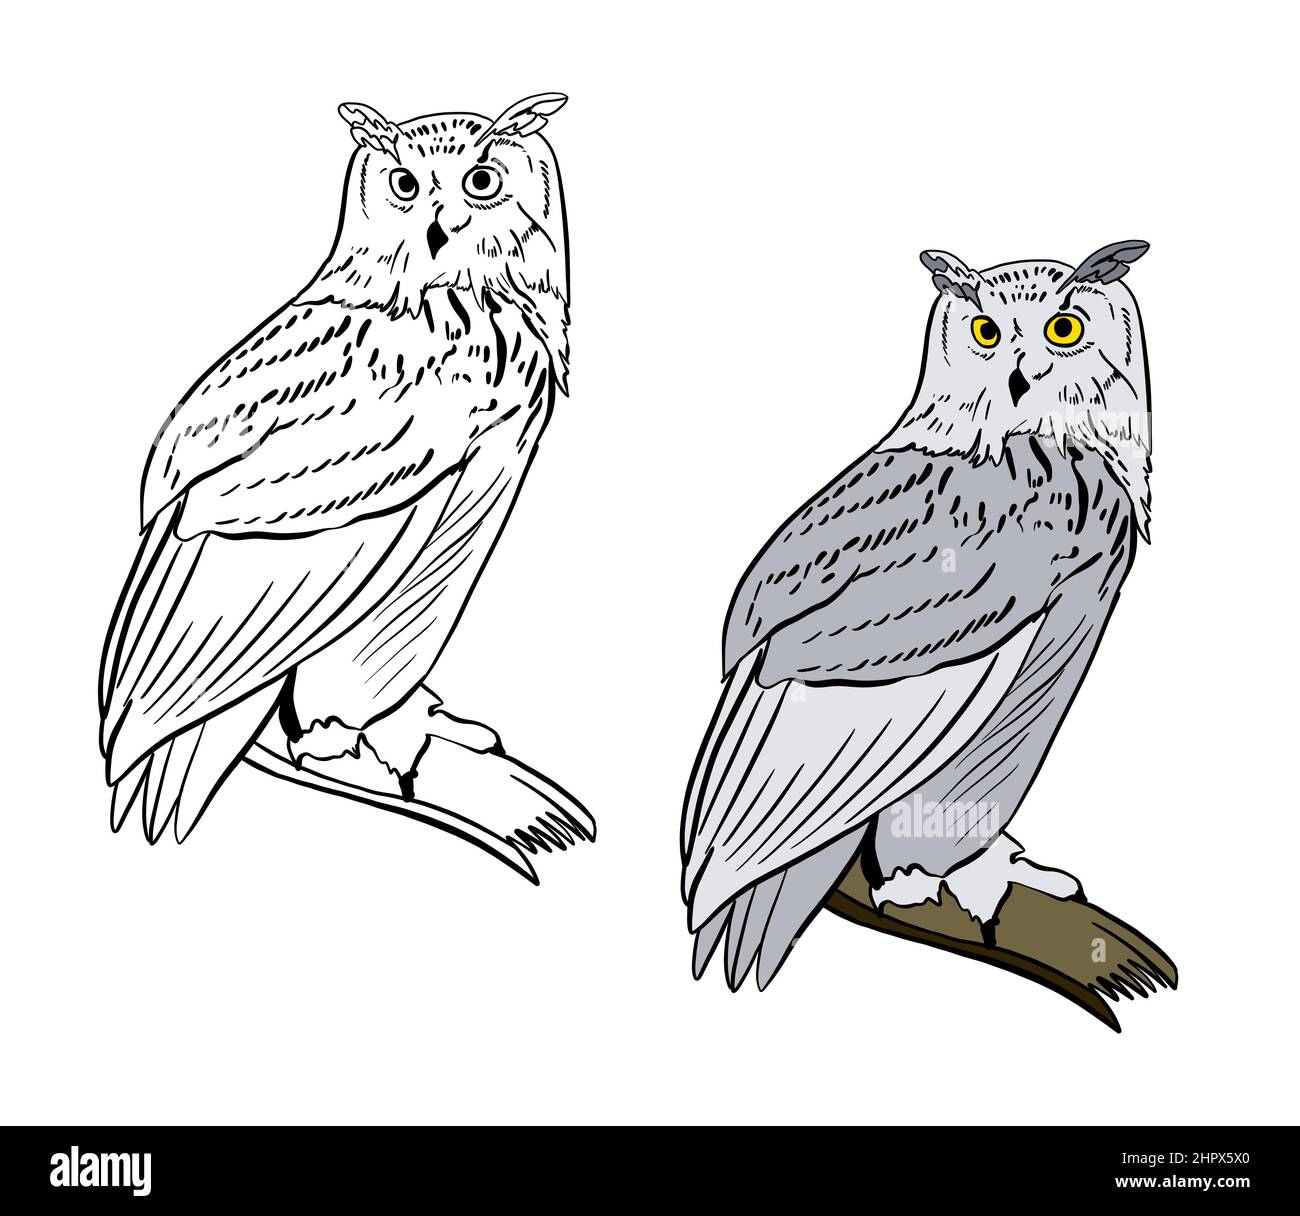 Illustration for a coloring book in color and black and white. Drawing of a owl on a white isolated background. High quality illustration Stock Photo